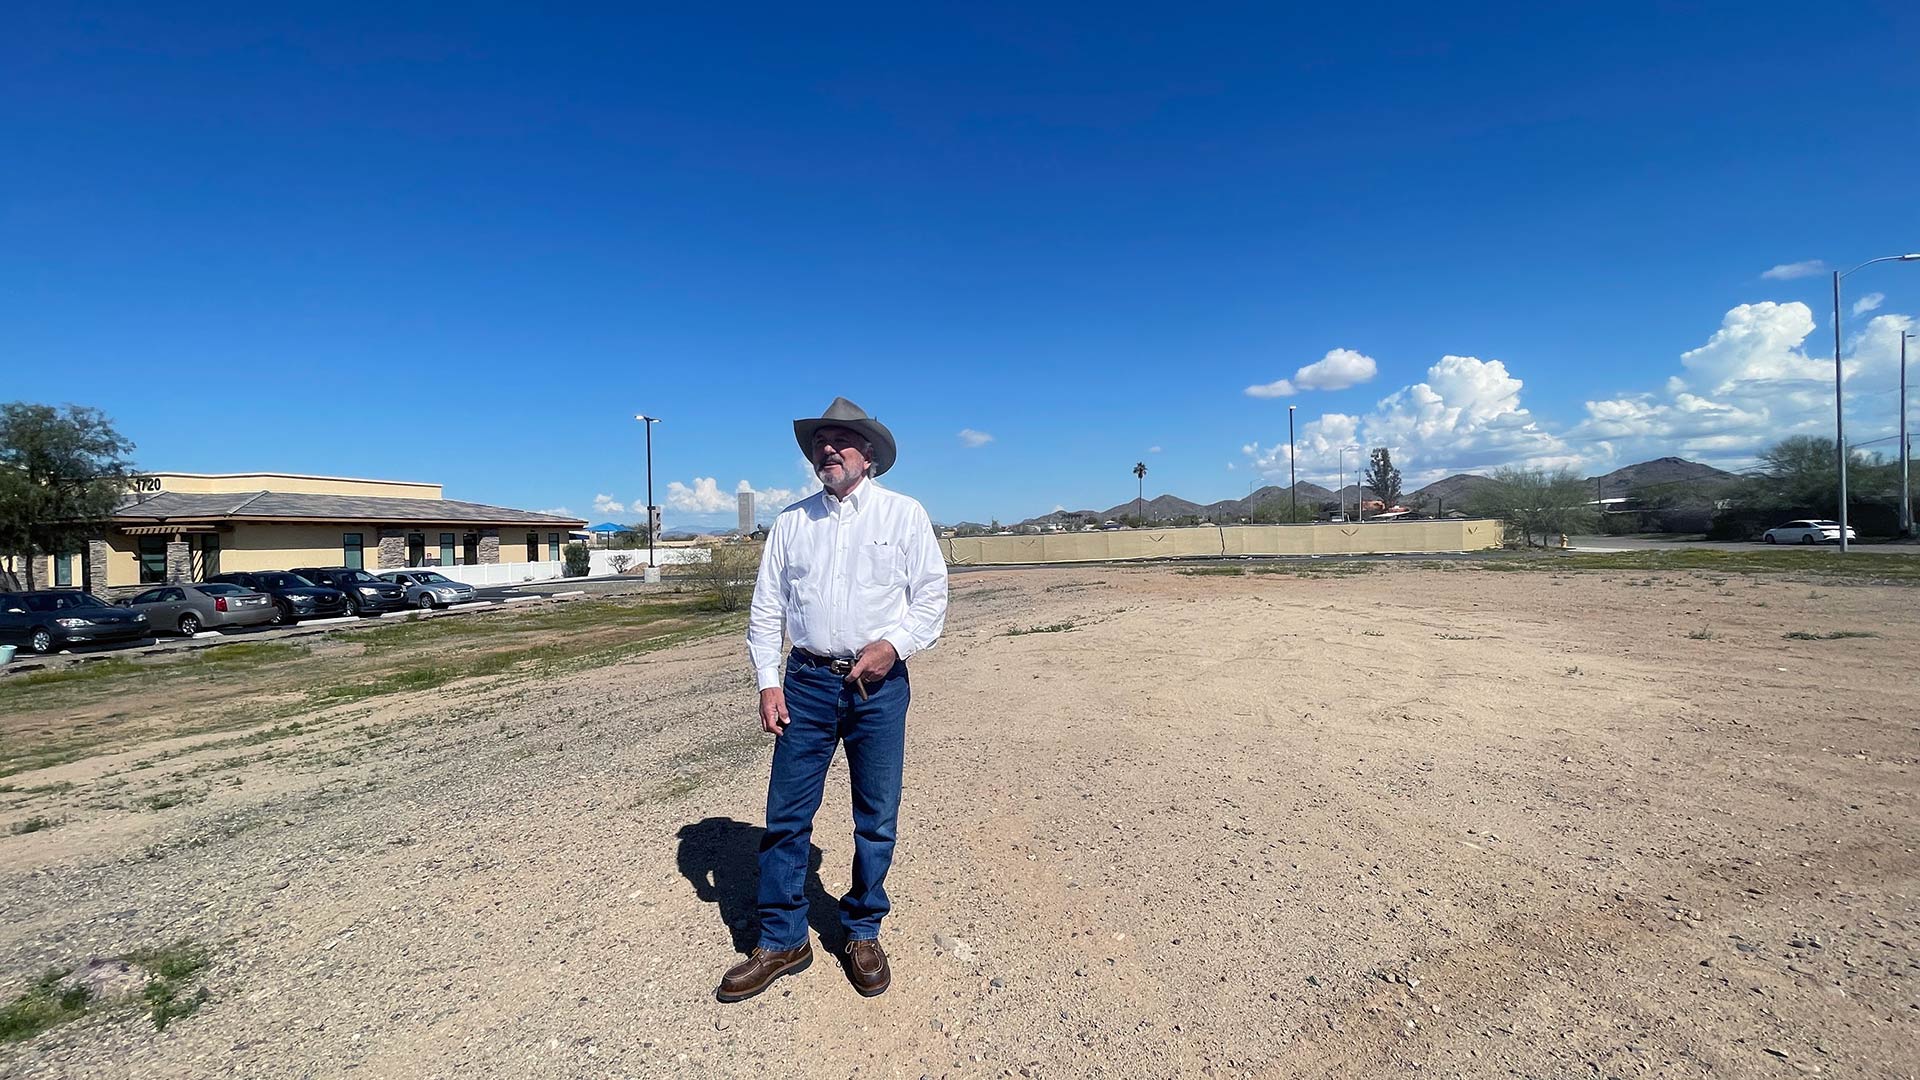 In the Phoenix area, development accelerated by CHIPS Act investment may disrupt rural lifestyles and transform parts of the desert. Above, developer Charles Eckert.